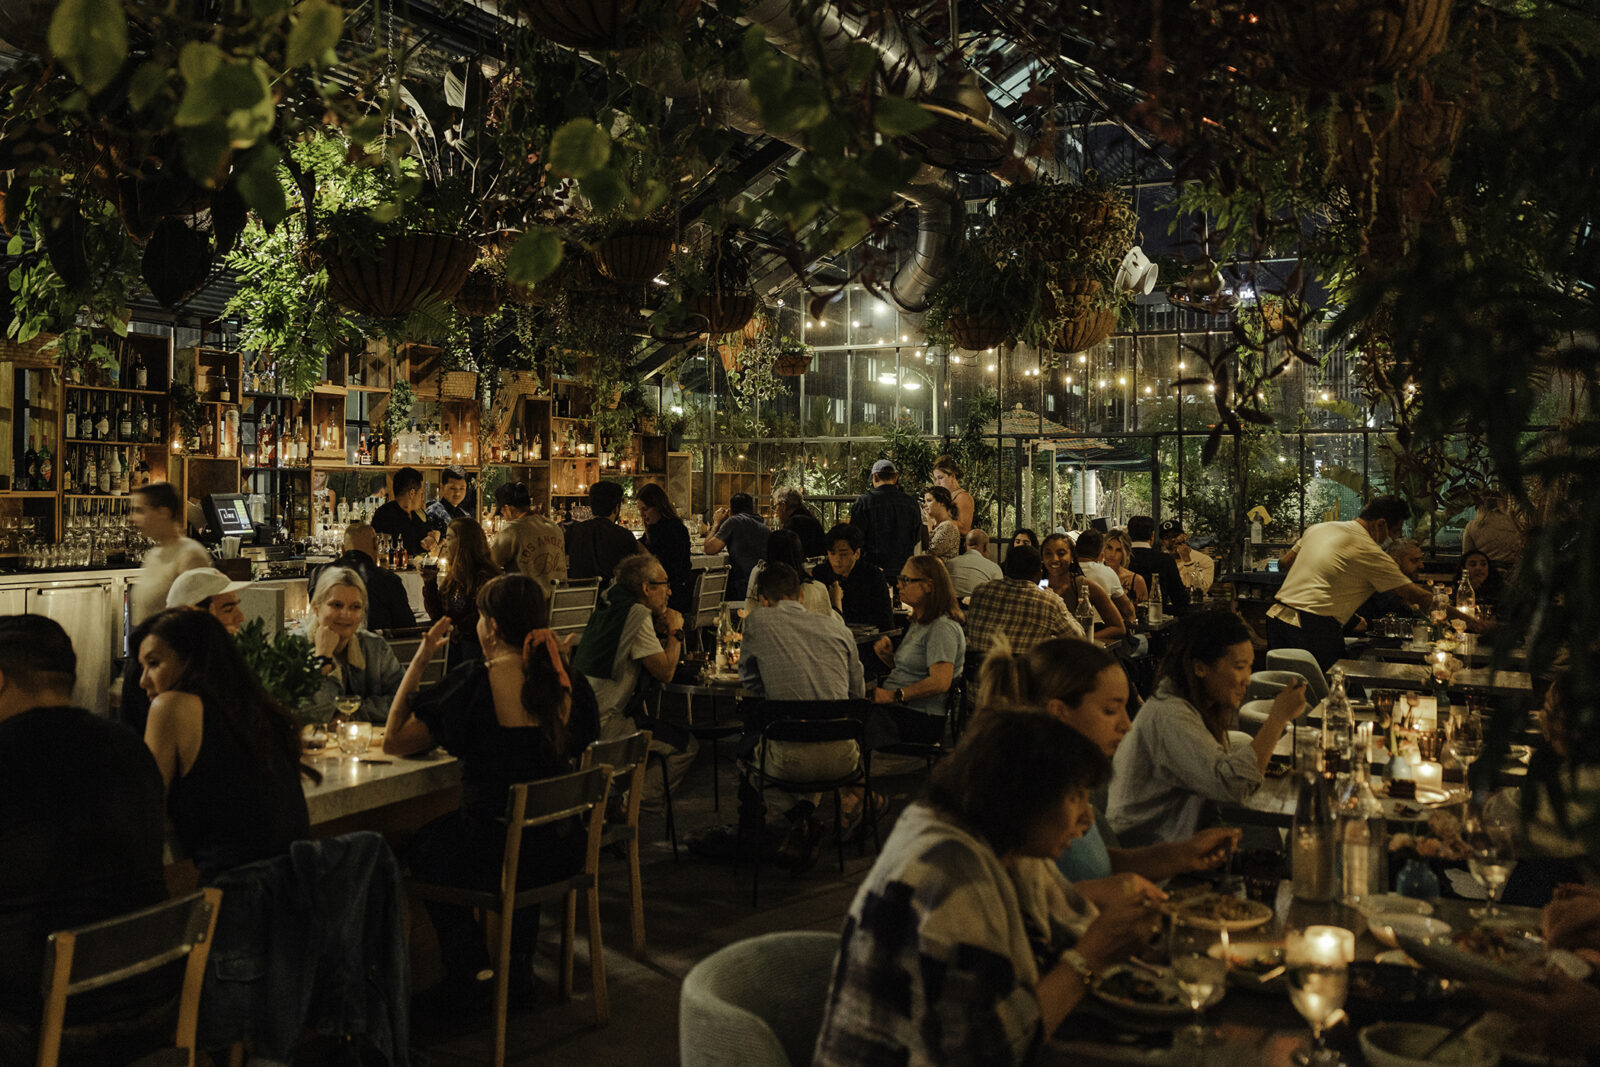 There are many people enjoying their dinner right beside the bar counter, while the roof is adorned with flower pots and small plants, creating a beautiful ambiance.